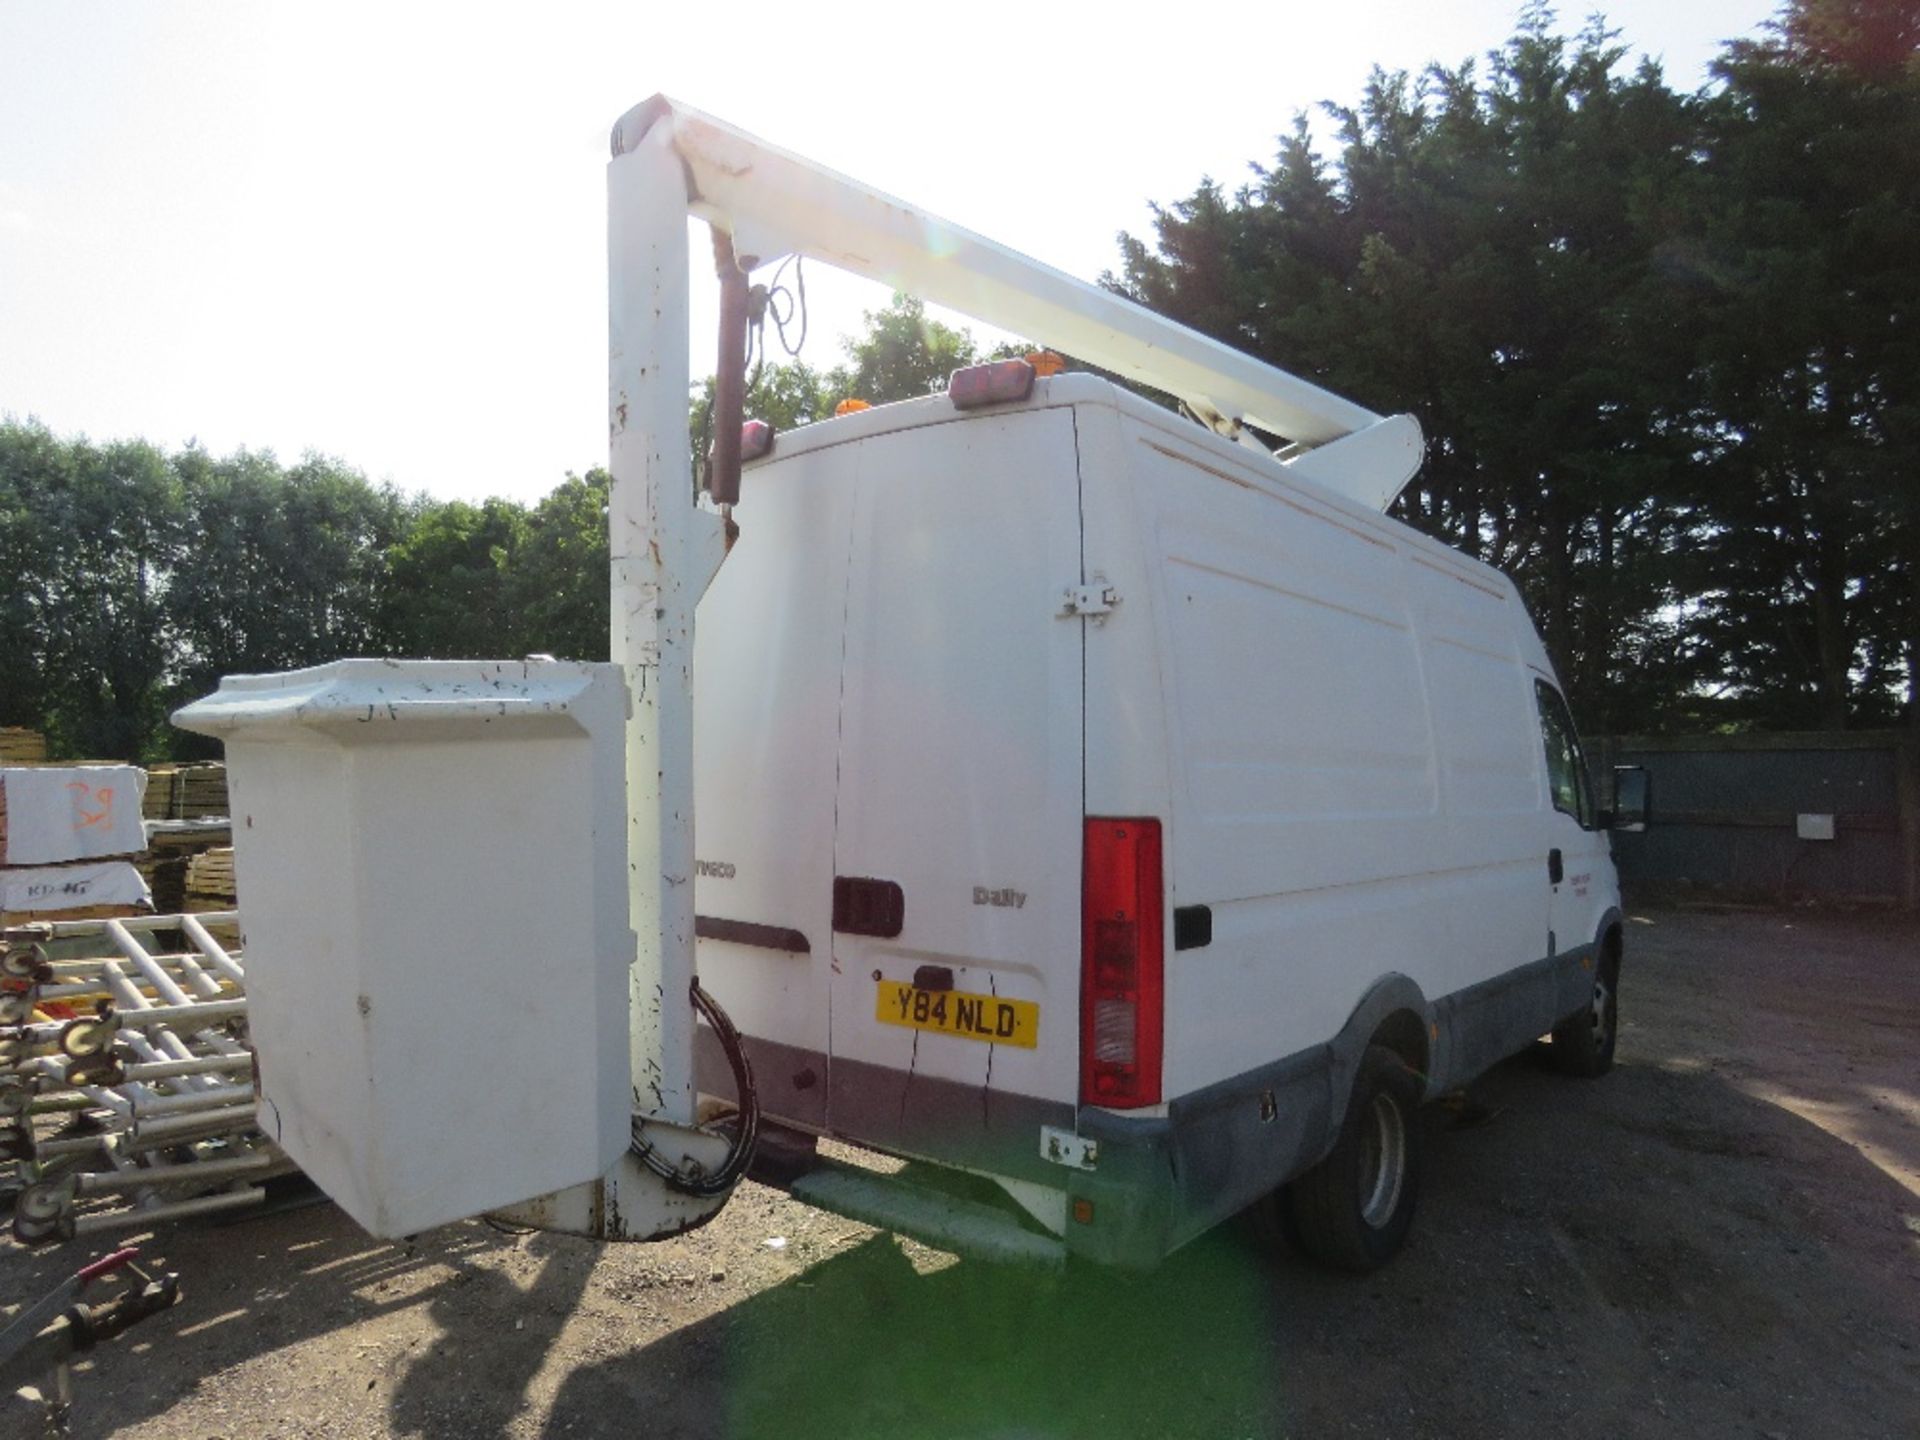 IVECO DAILY CHERRY PICKER VAN REG:Y84 NLD. WITH V5 AND PLATING CERTIFICATE, REGISTERED AS TOWER TRUC - Image 9 of 15